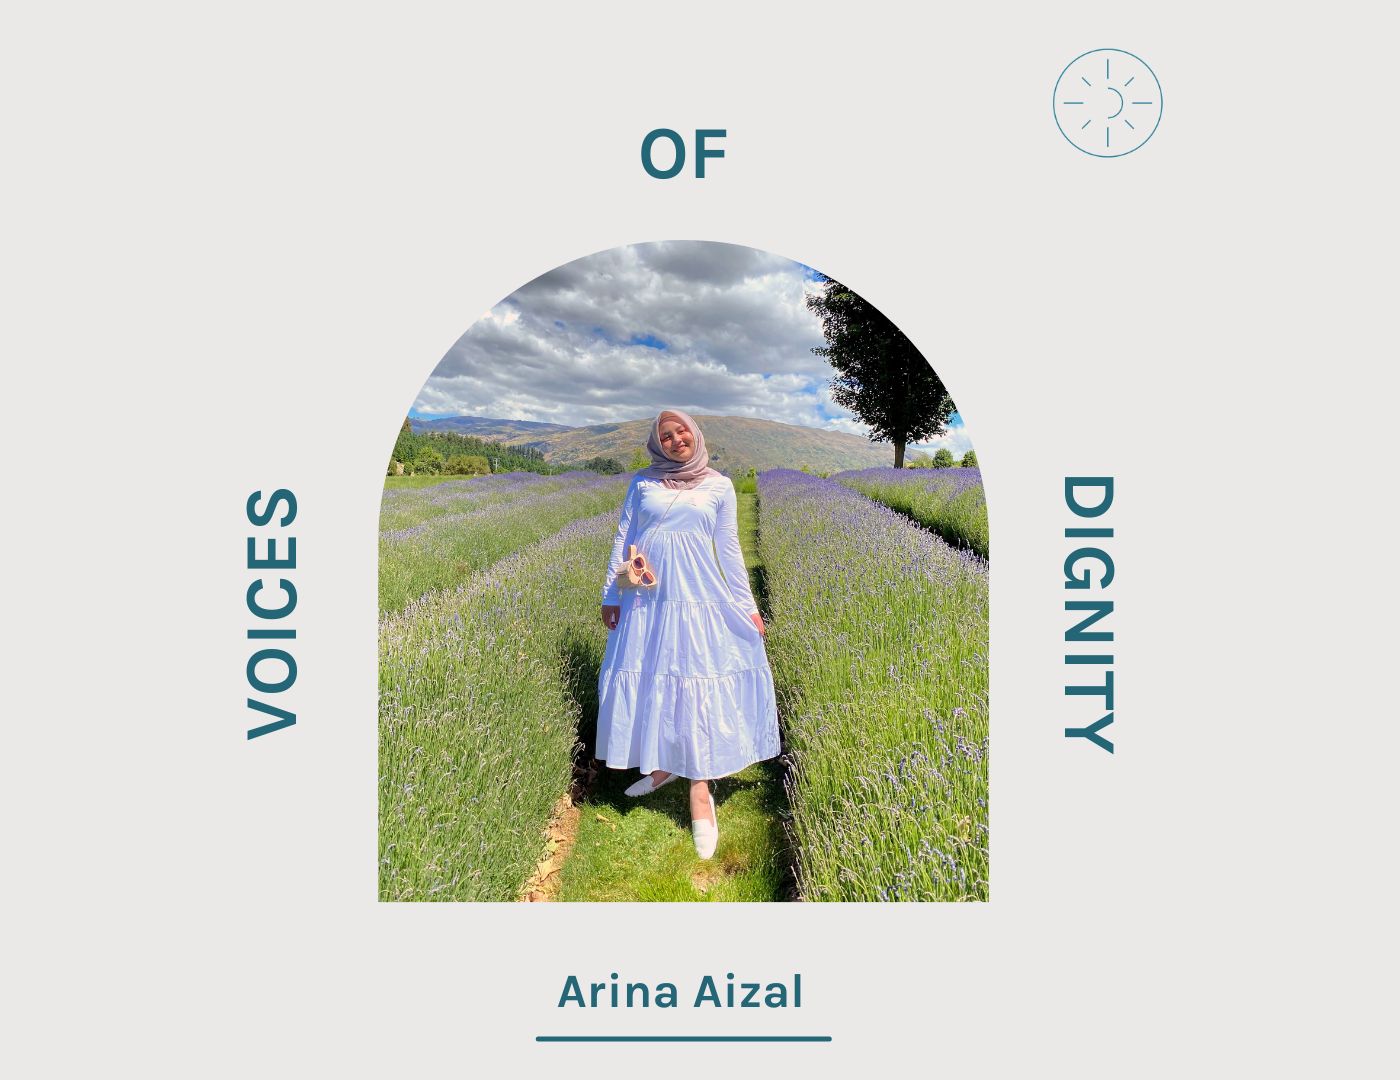 Voices of Dignity: Arina Aizal